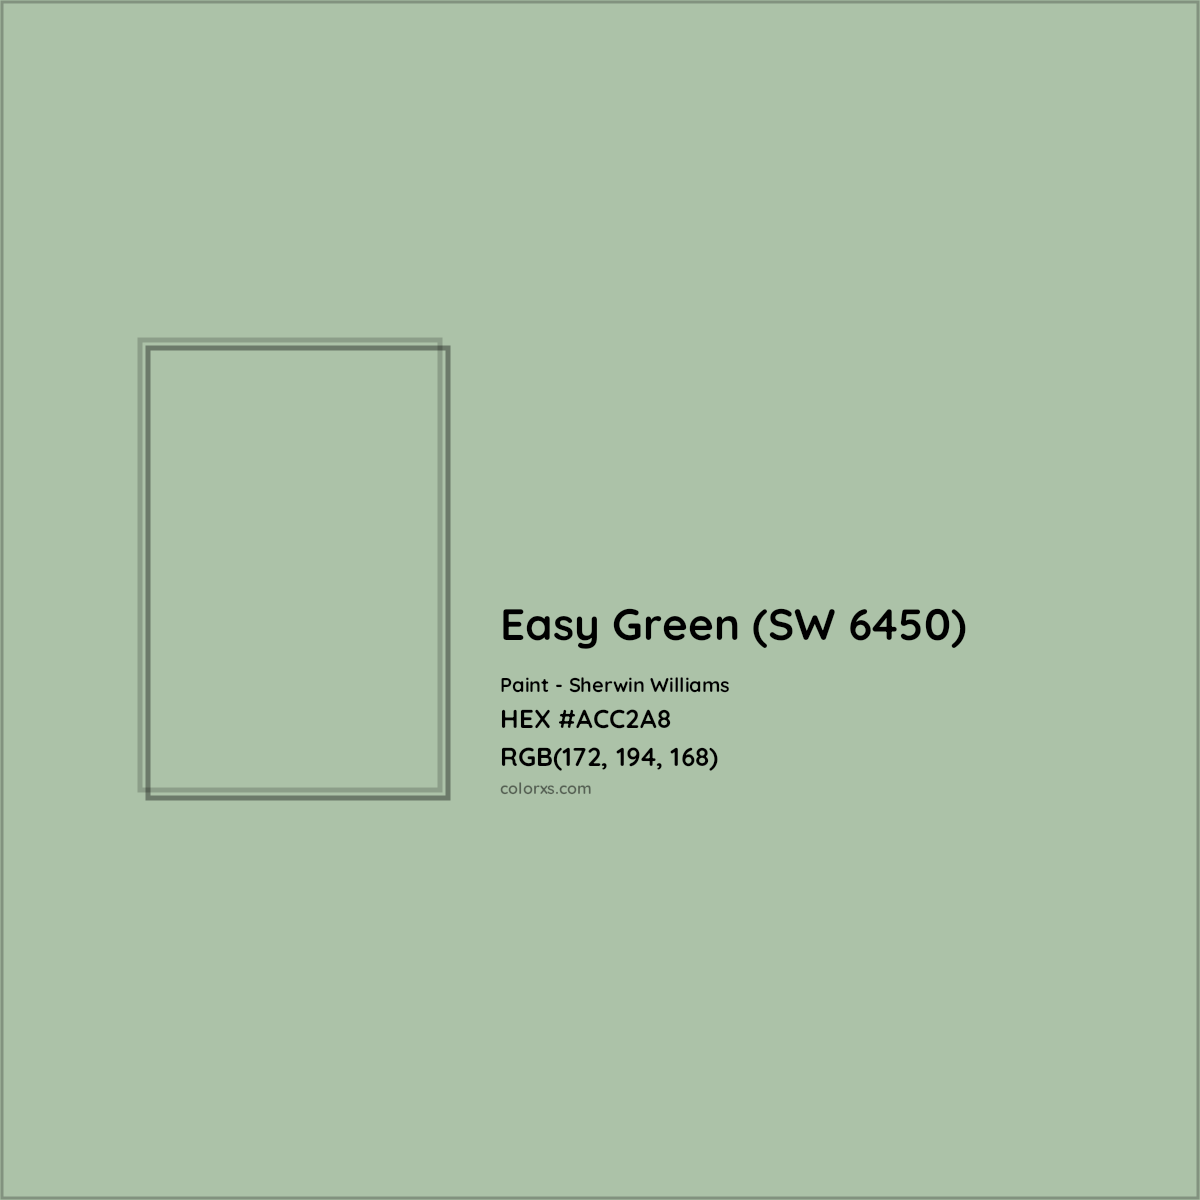 HEX #ACC2A8 Easy Green (SW 6450) Paint Sherwin Williams - Color Code